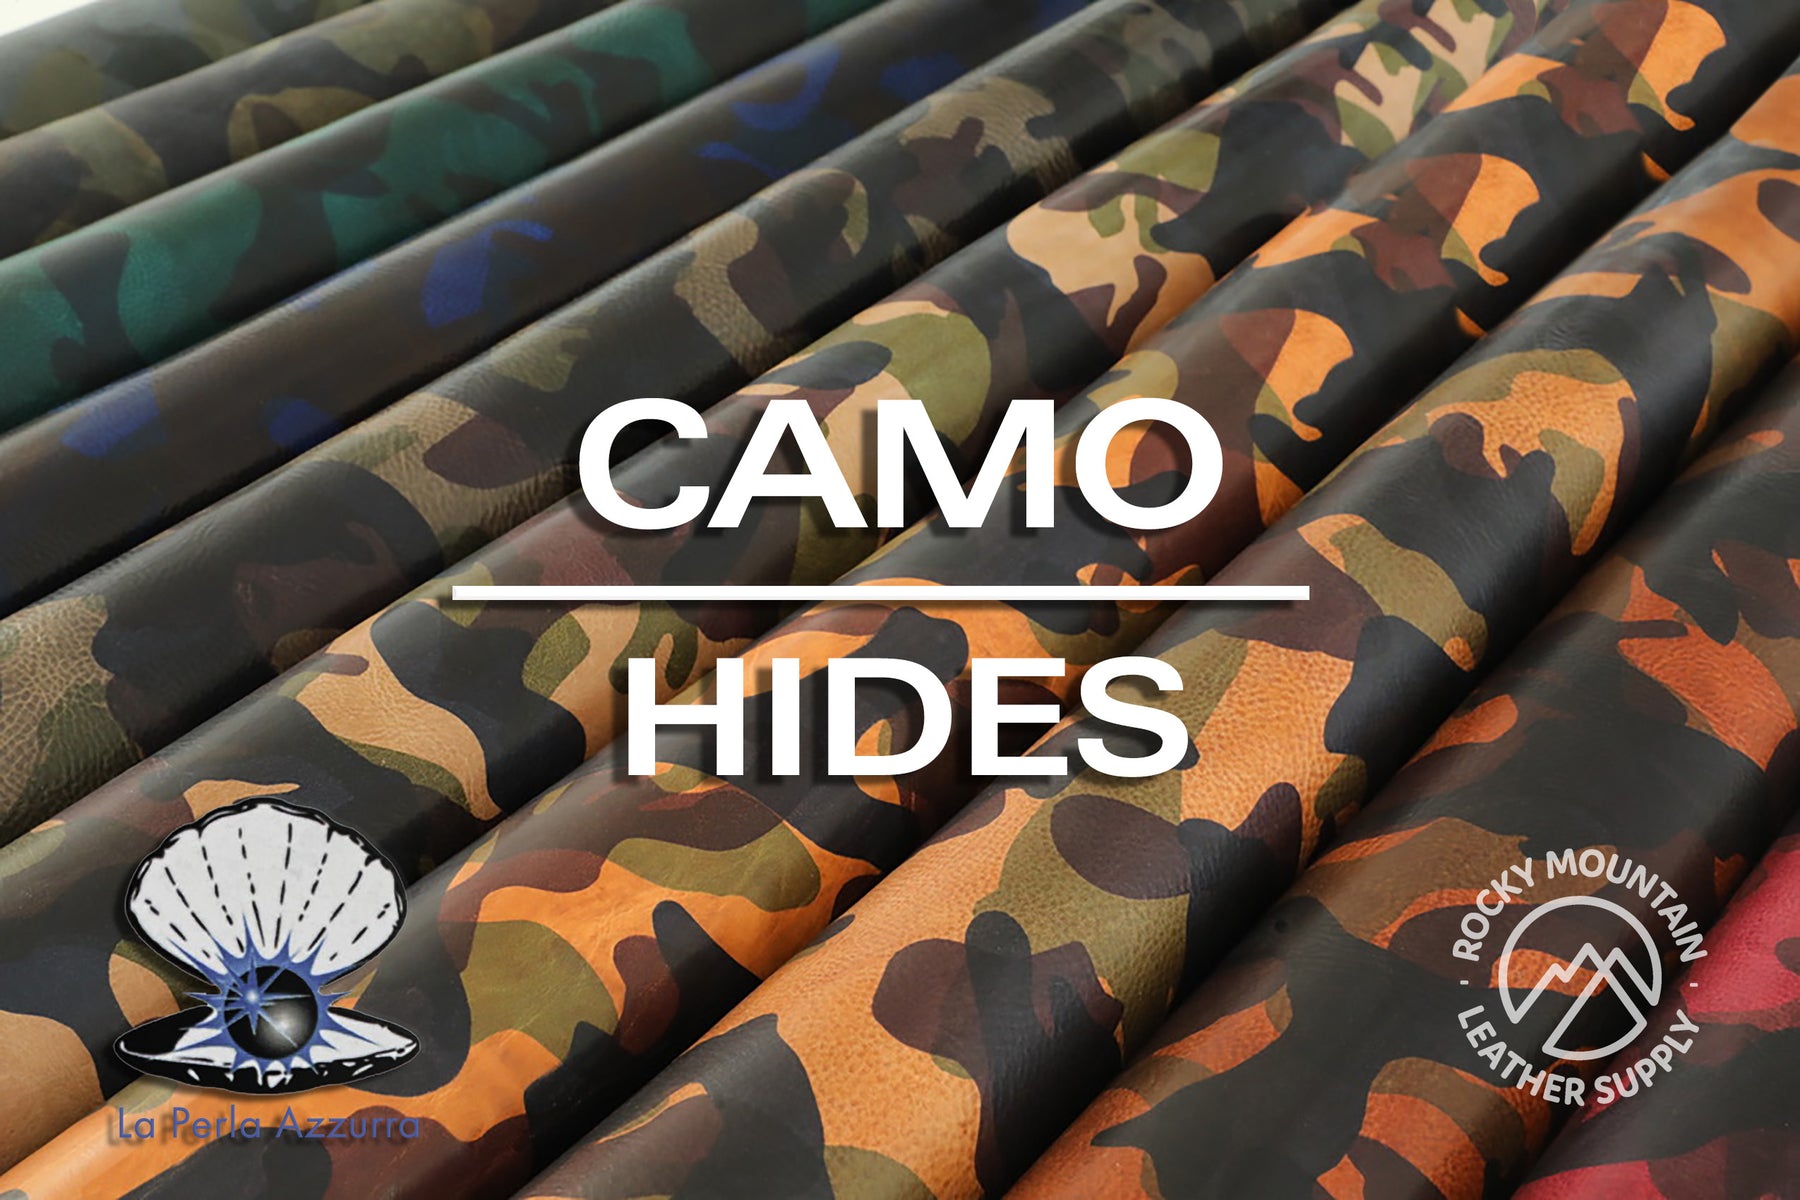 CAMO Full Grain Leather Hide for Purses Clothing Crafts Wallets Handbags  Journal Covers Book Binding Hunting Camouflage Fabric Leather Sheet